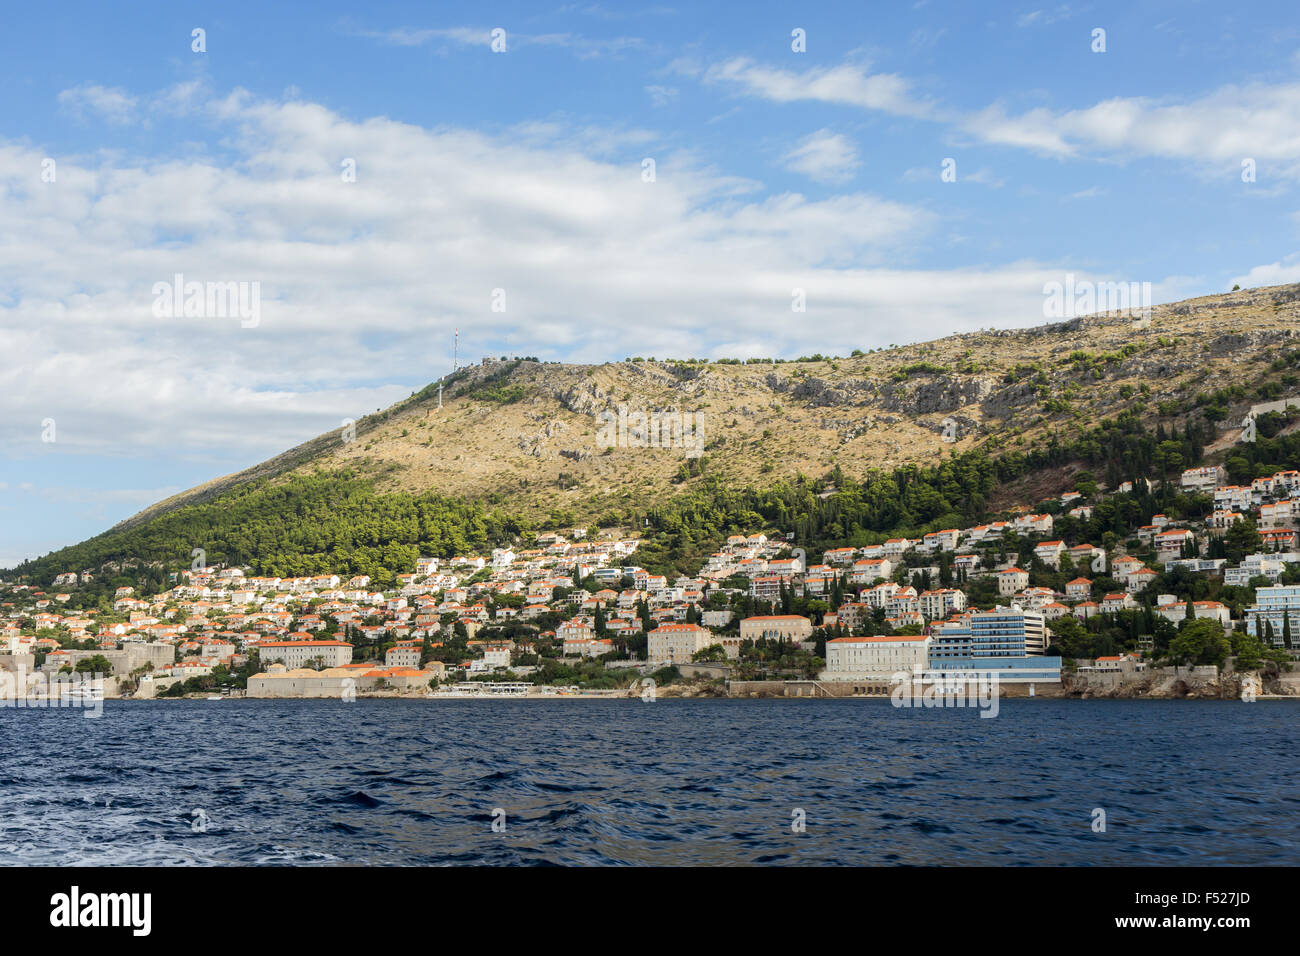 View of buildings on the hillside and Mount Srd from the sea in Dubrovnik, Croatia. Copy space. Stock Photo